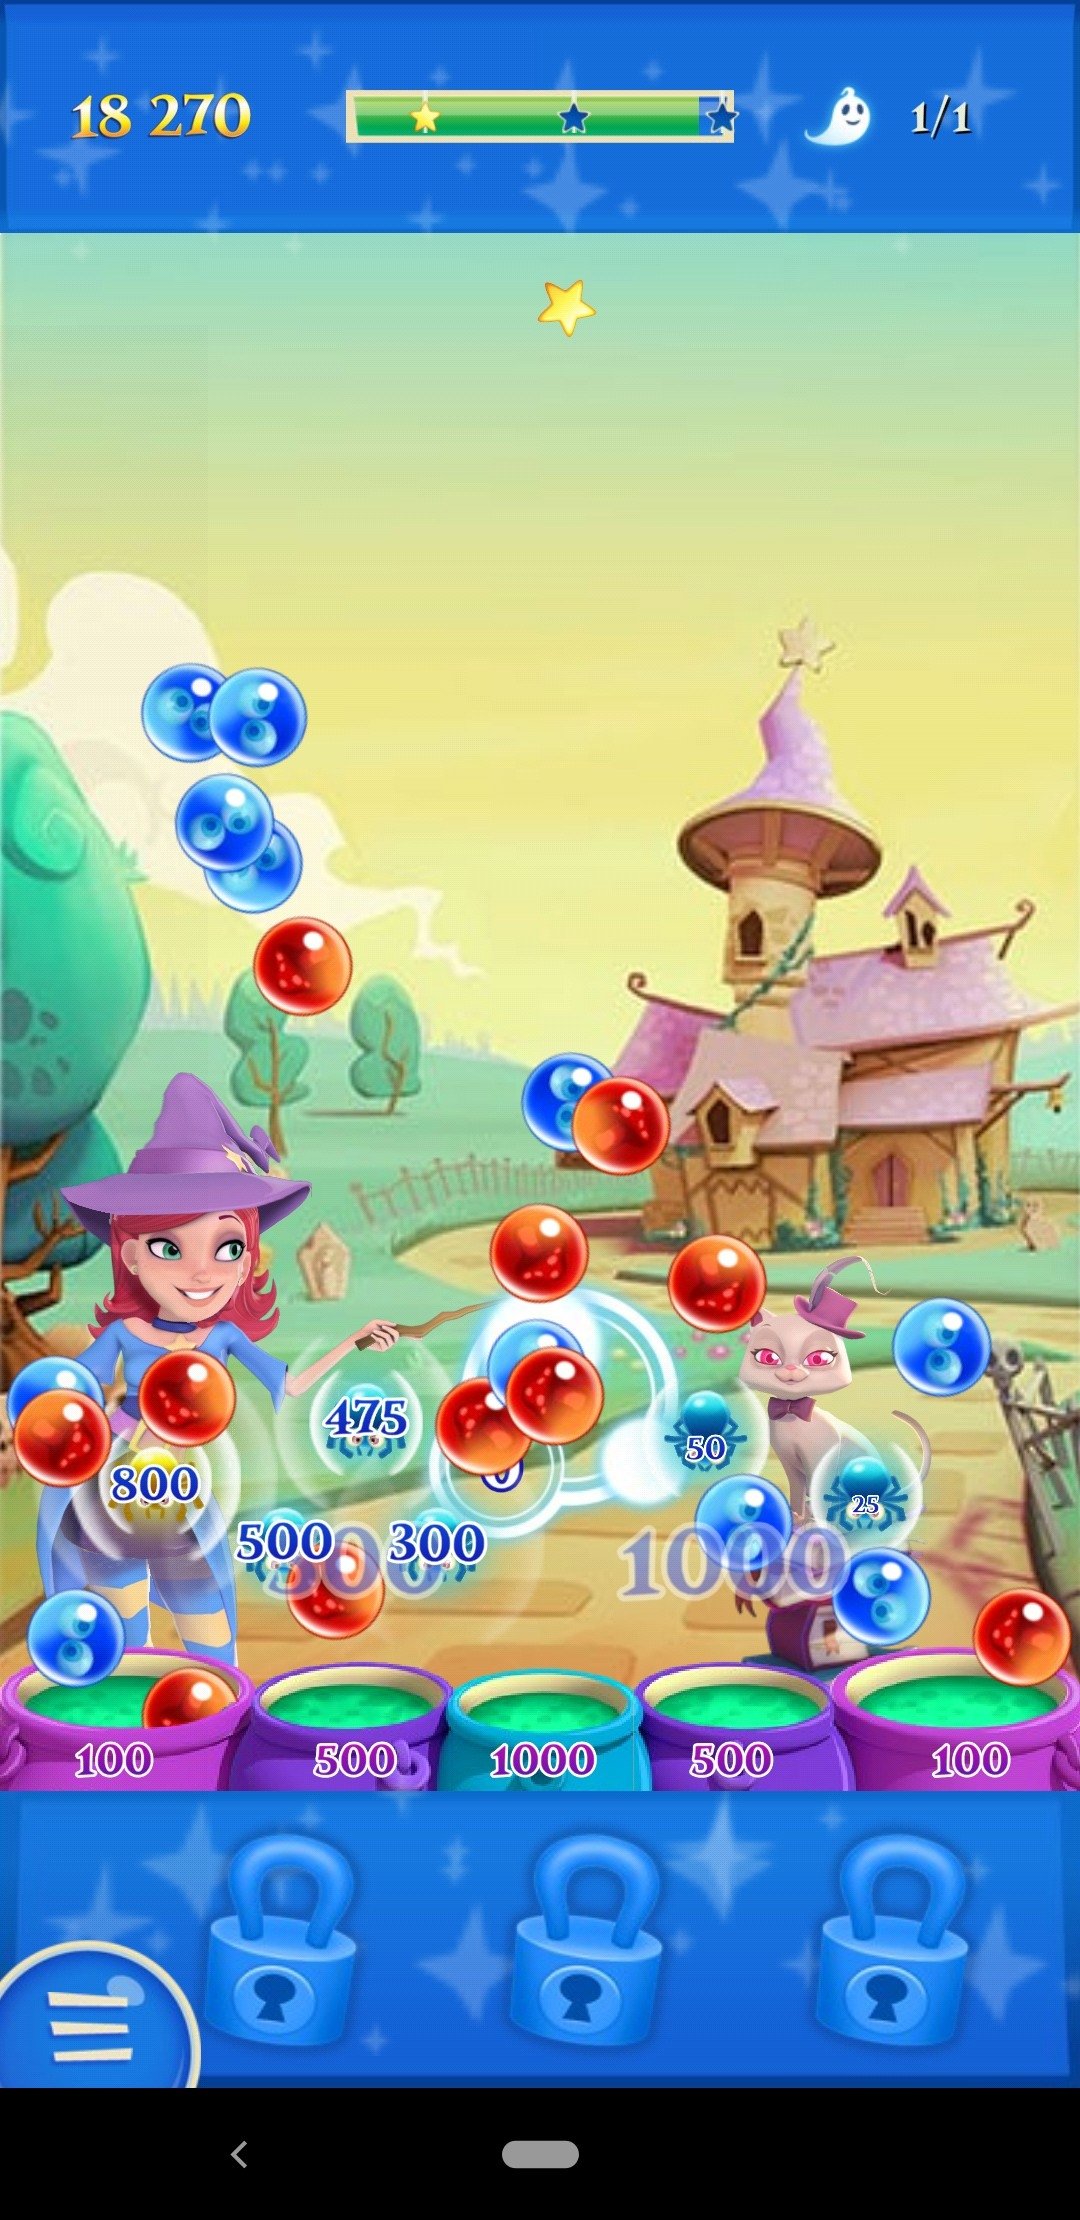 Bubble Witch 3 Saga instal the new version for ios